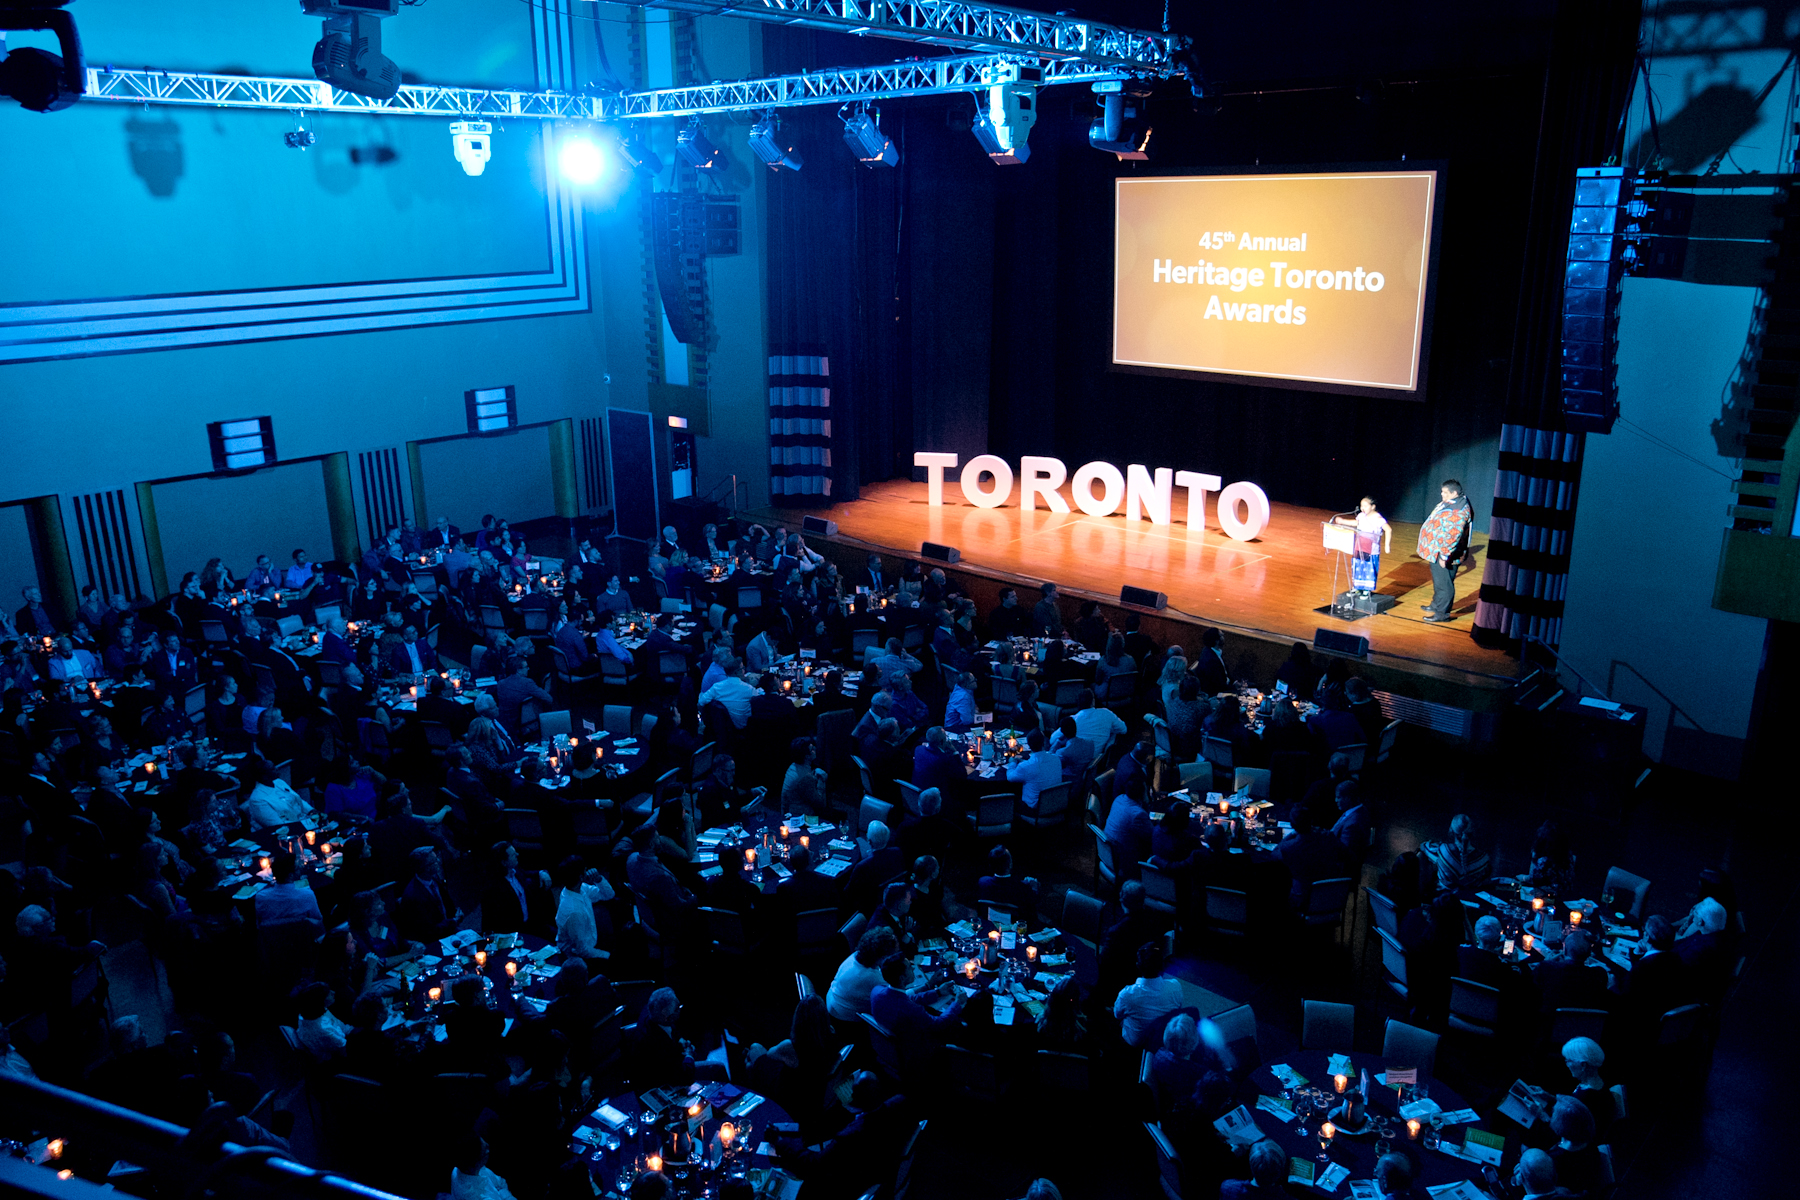 A photo taken from above looking down on a stage with a man and girl standing at the podium and large white letters spelling out Toronto to his left. Above and behind is a screen projection with the words 45th Annual Heritage Toronto Awards. On the floor of the auditorium are groups of people sitting at round tables.